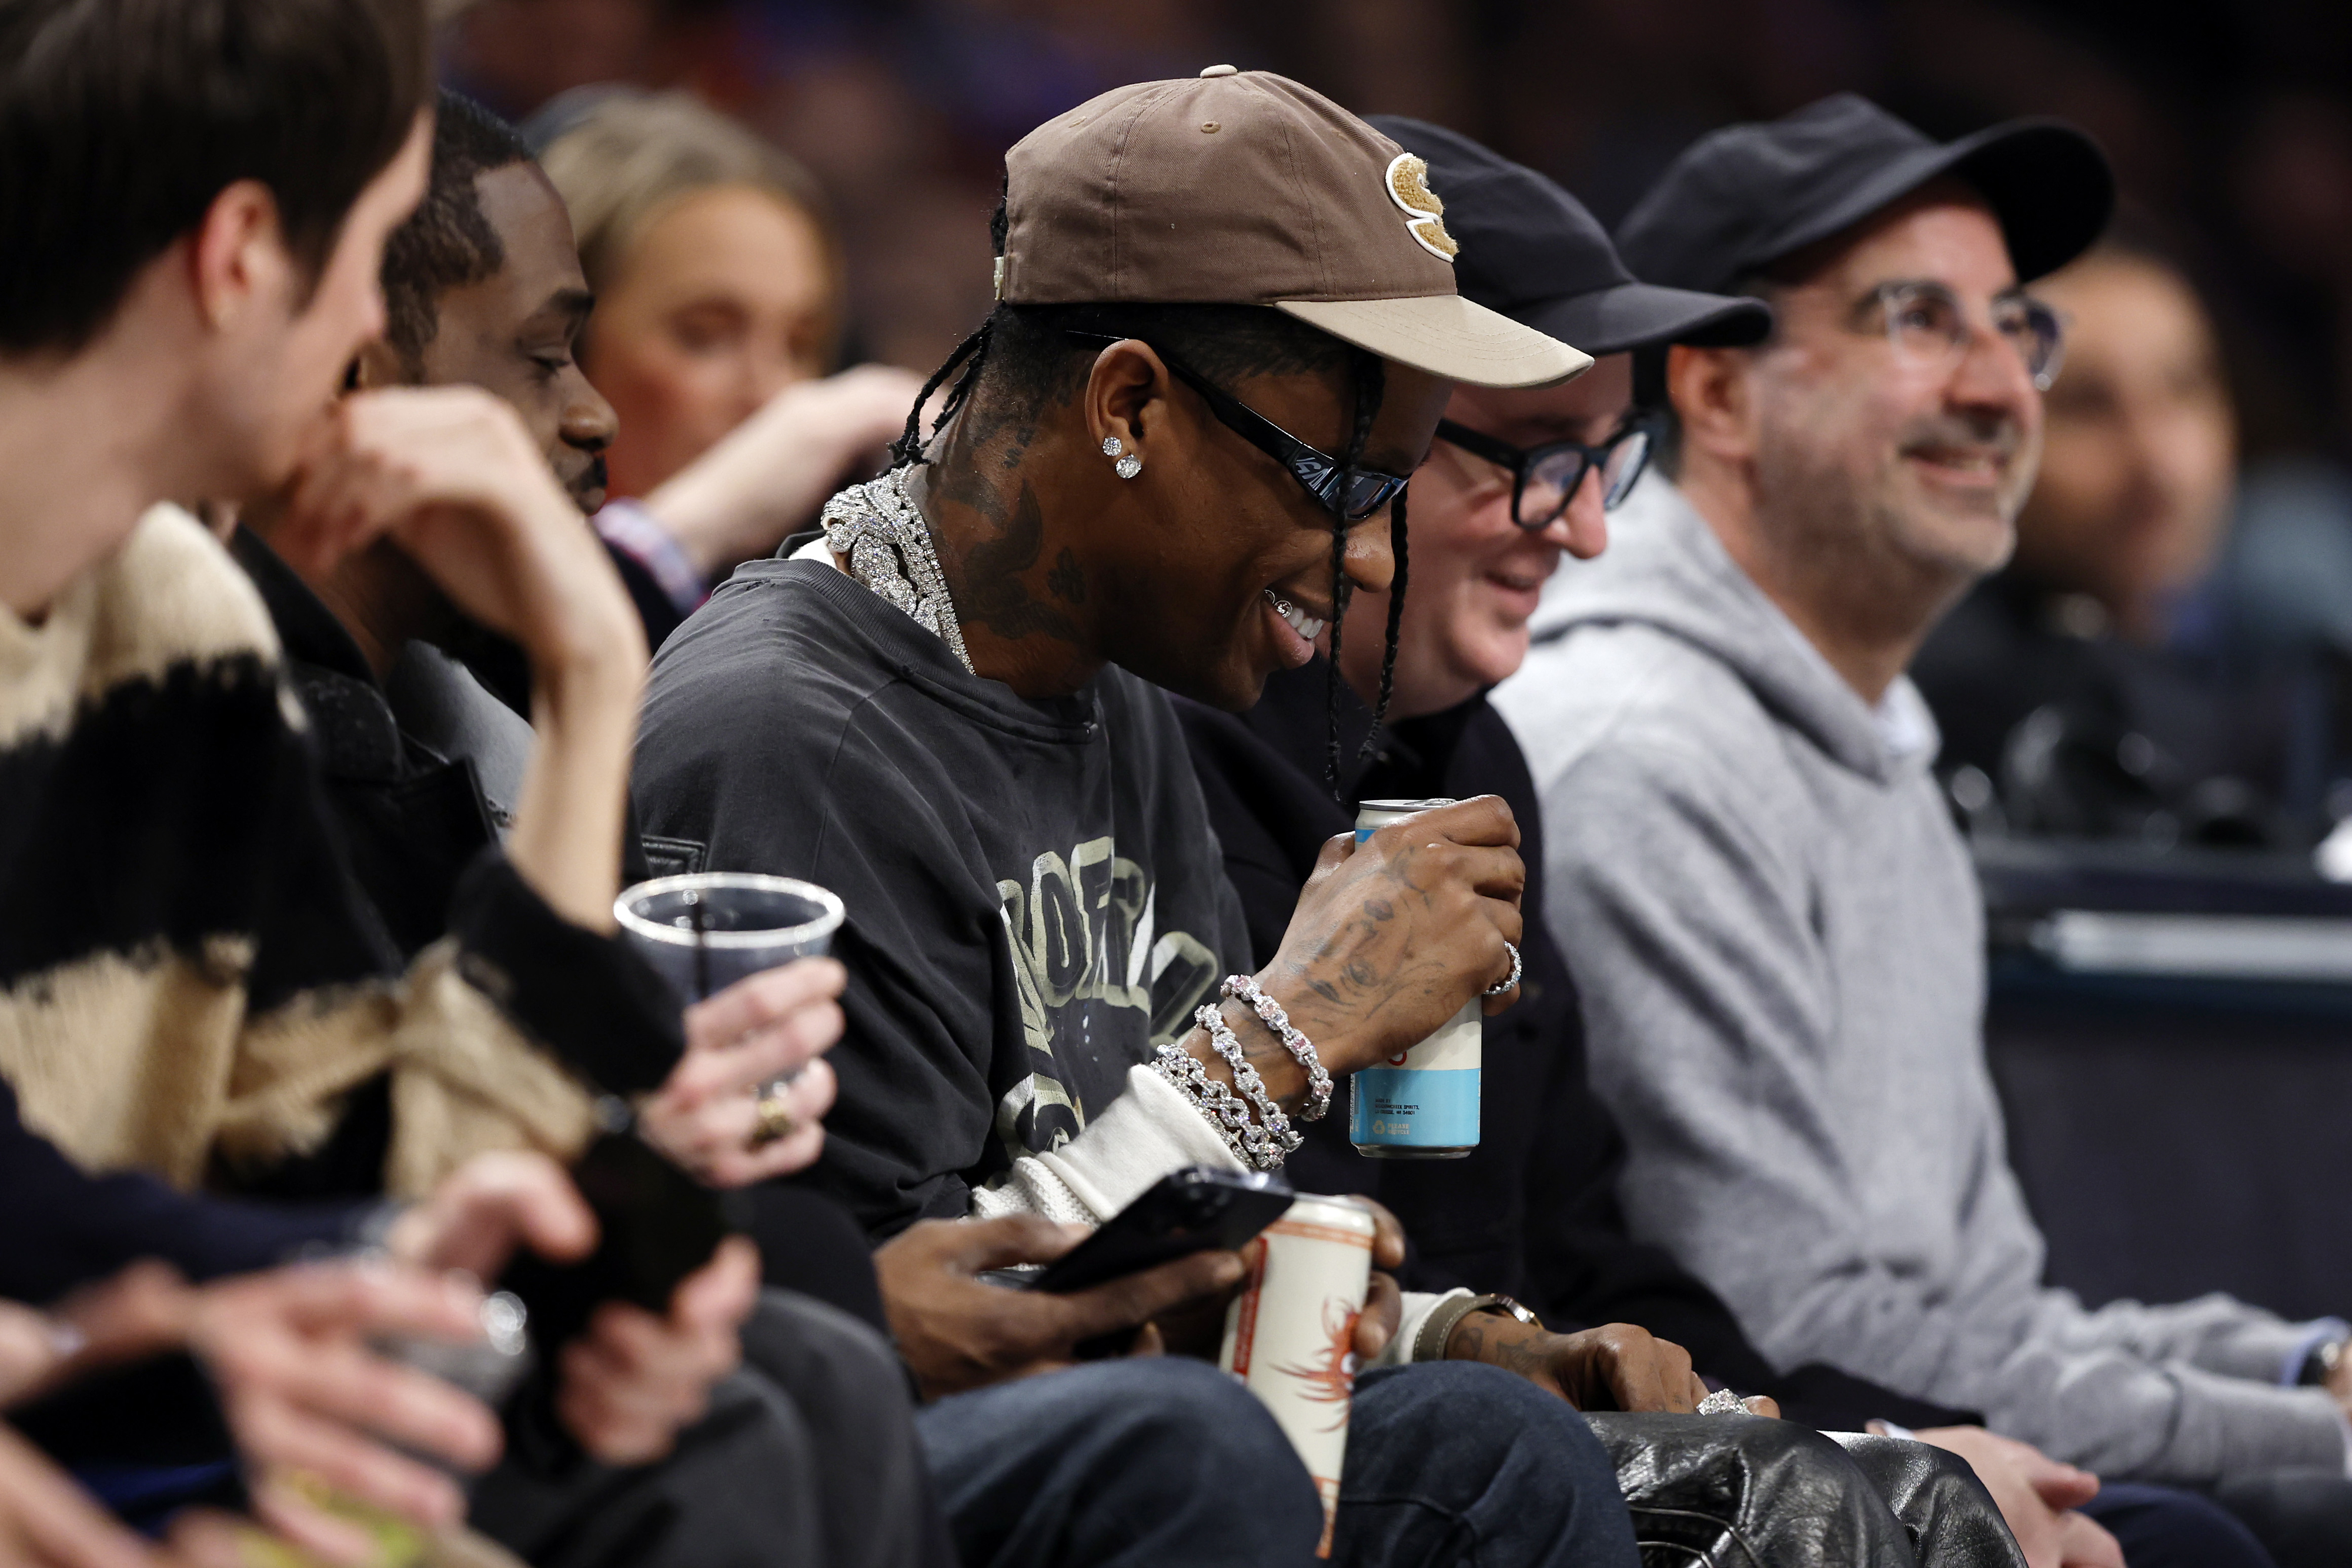 Travis Scott sitting courtside at a basketball game while holding a can of his Cacti drink